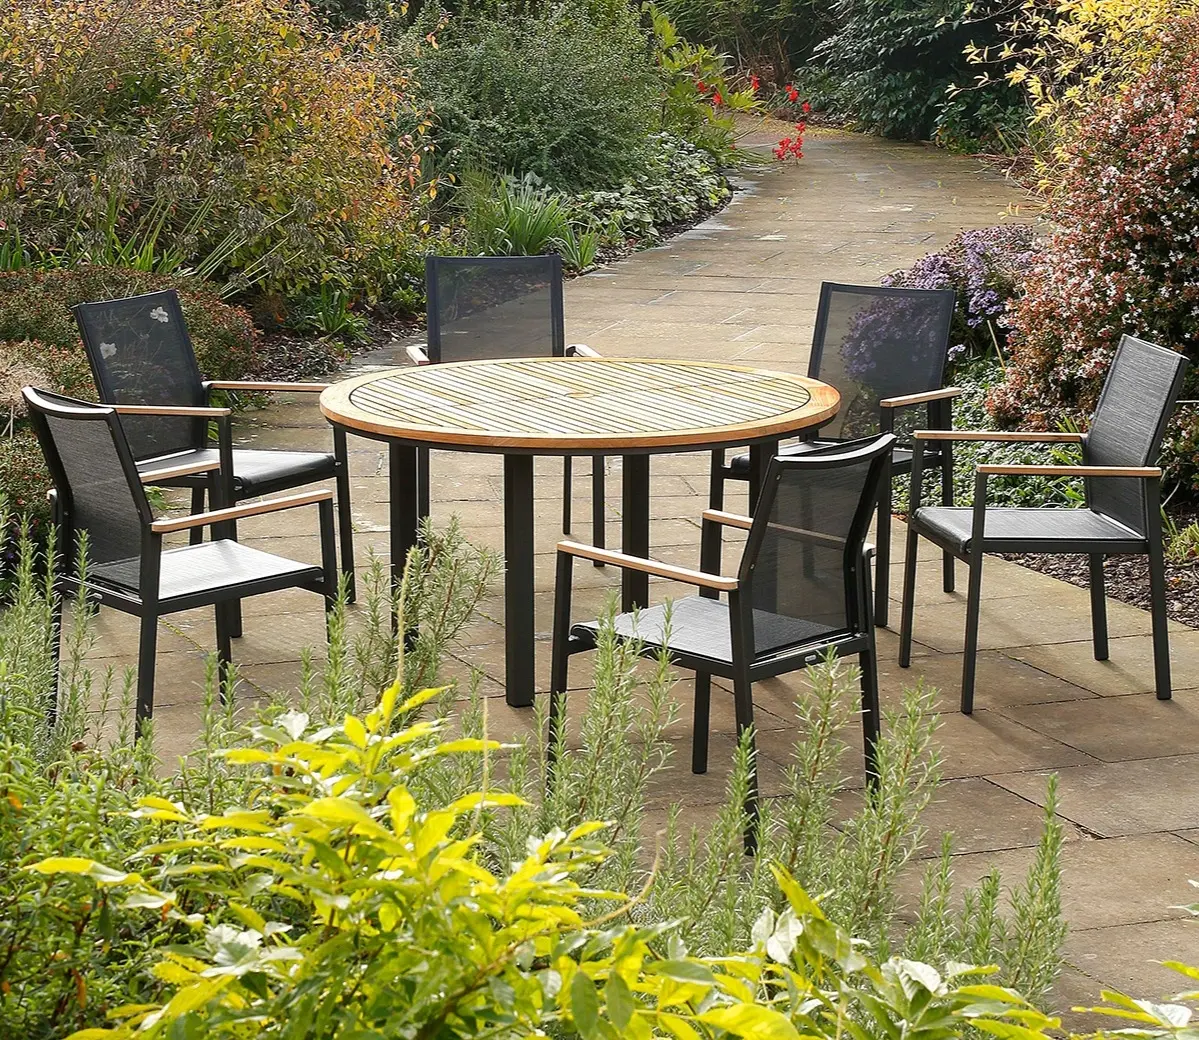 Barlow Tyrie Aura 6 Seater Round Dining Set